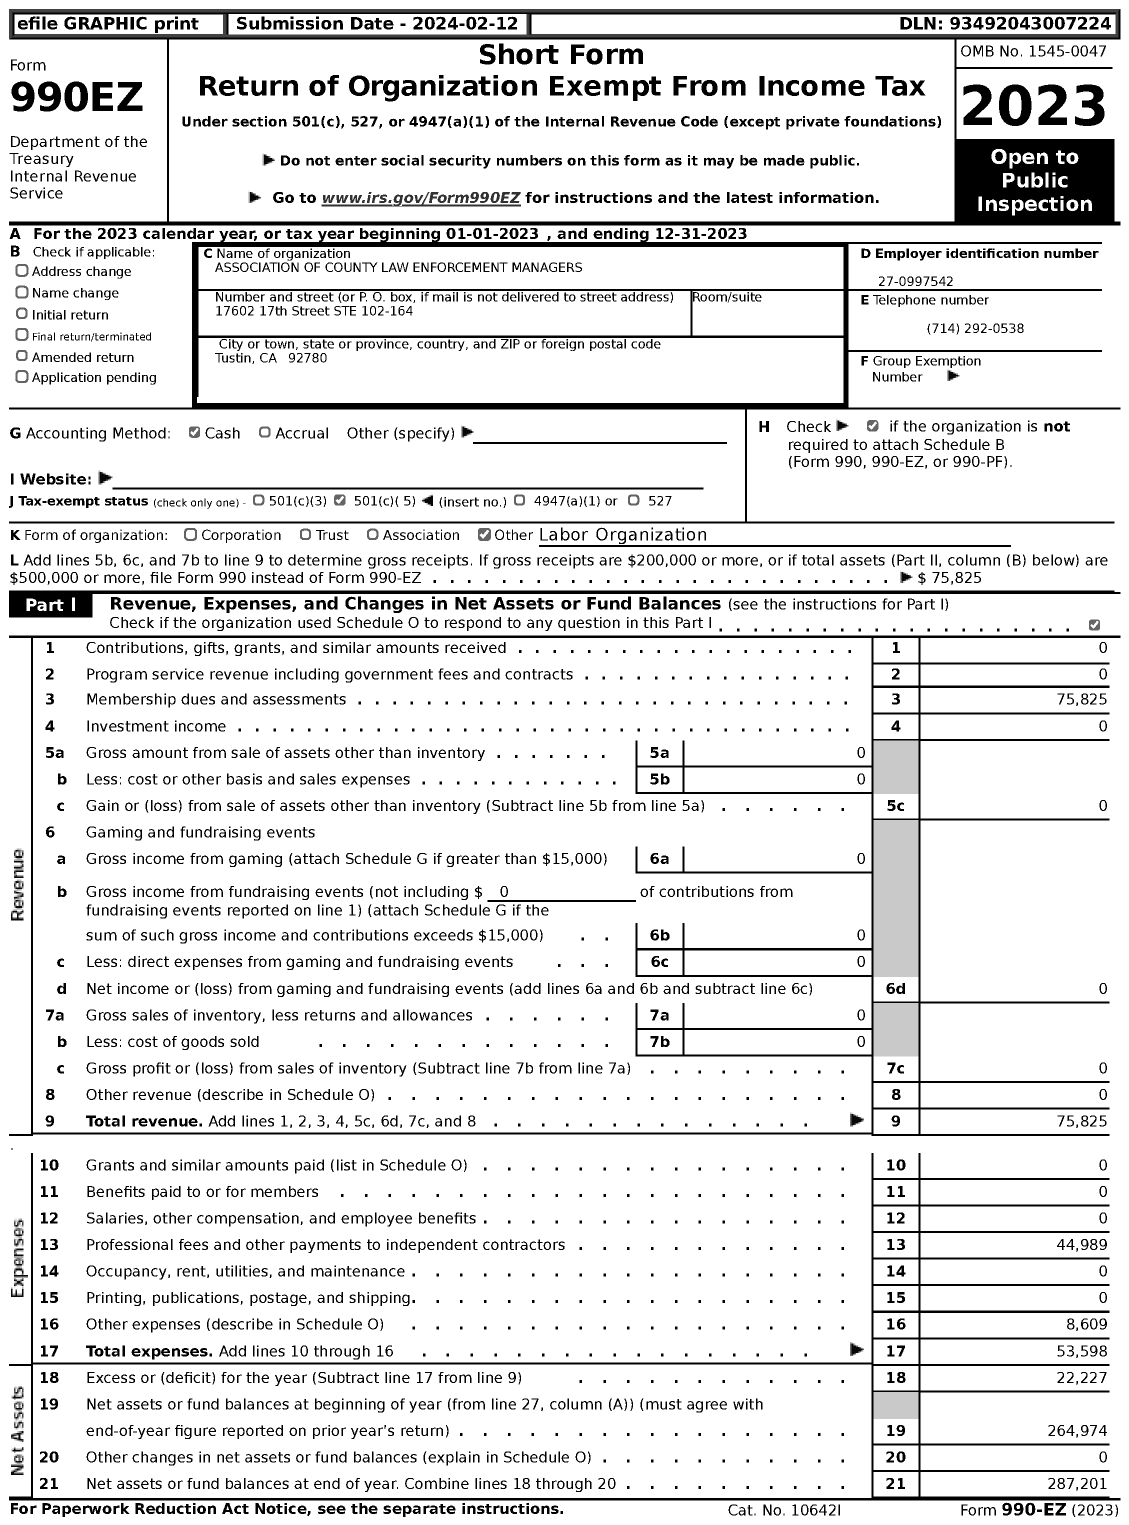 Image of first page of 2023 Form 990EZ for Association of County Law Enforcement Managers